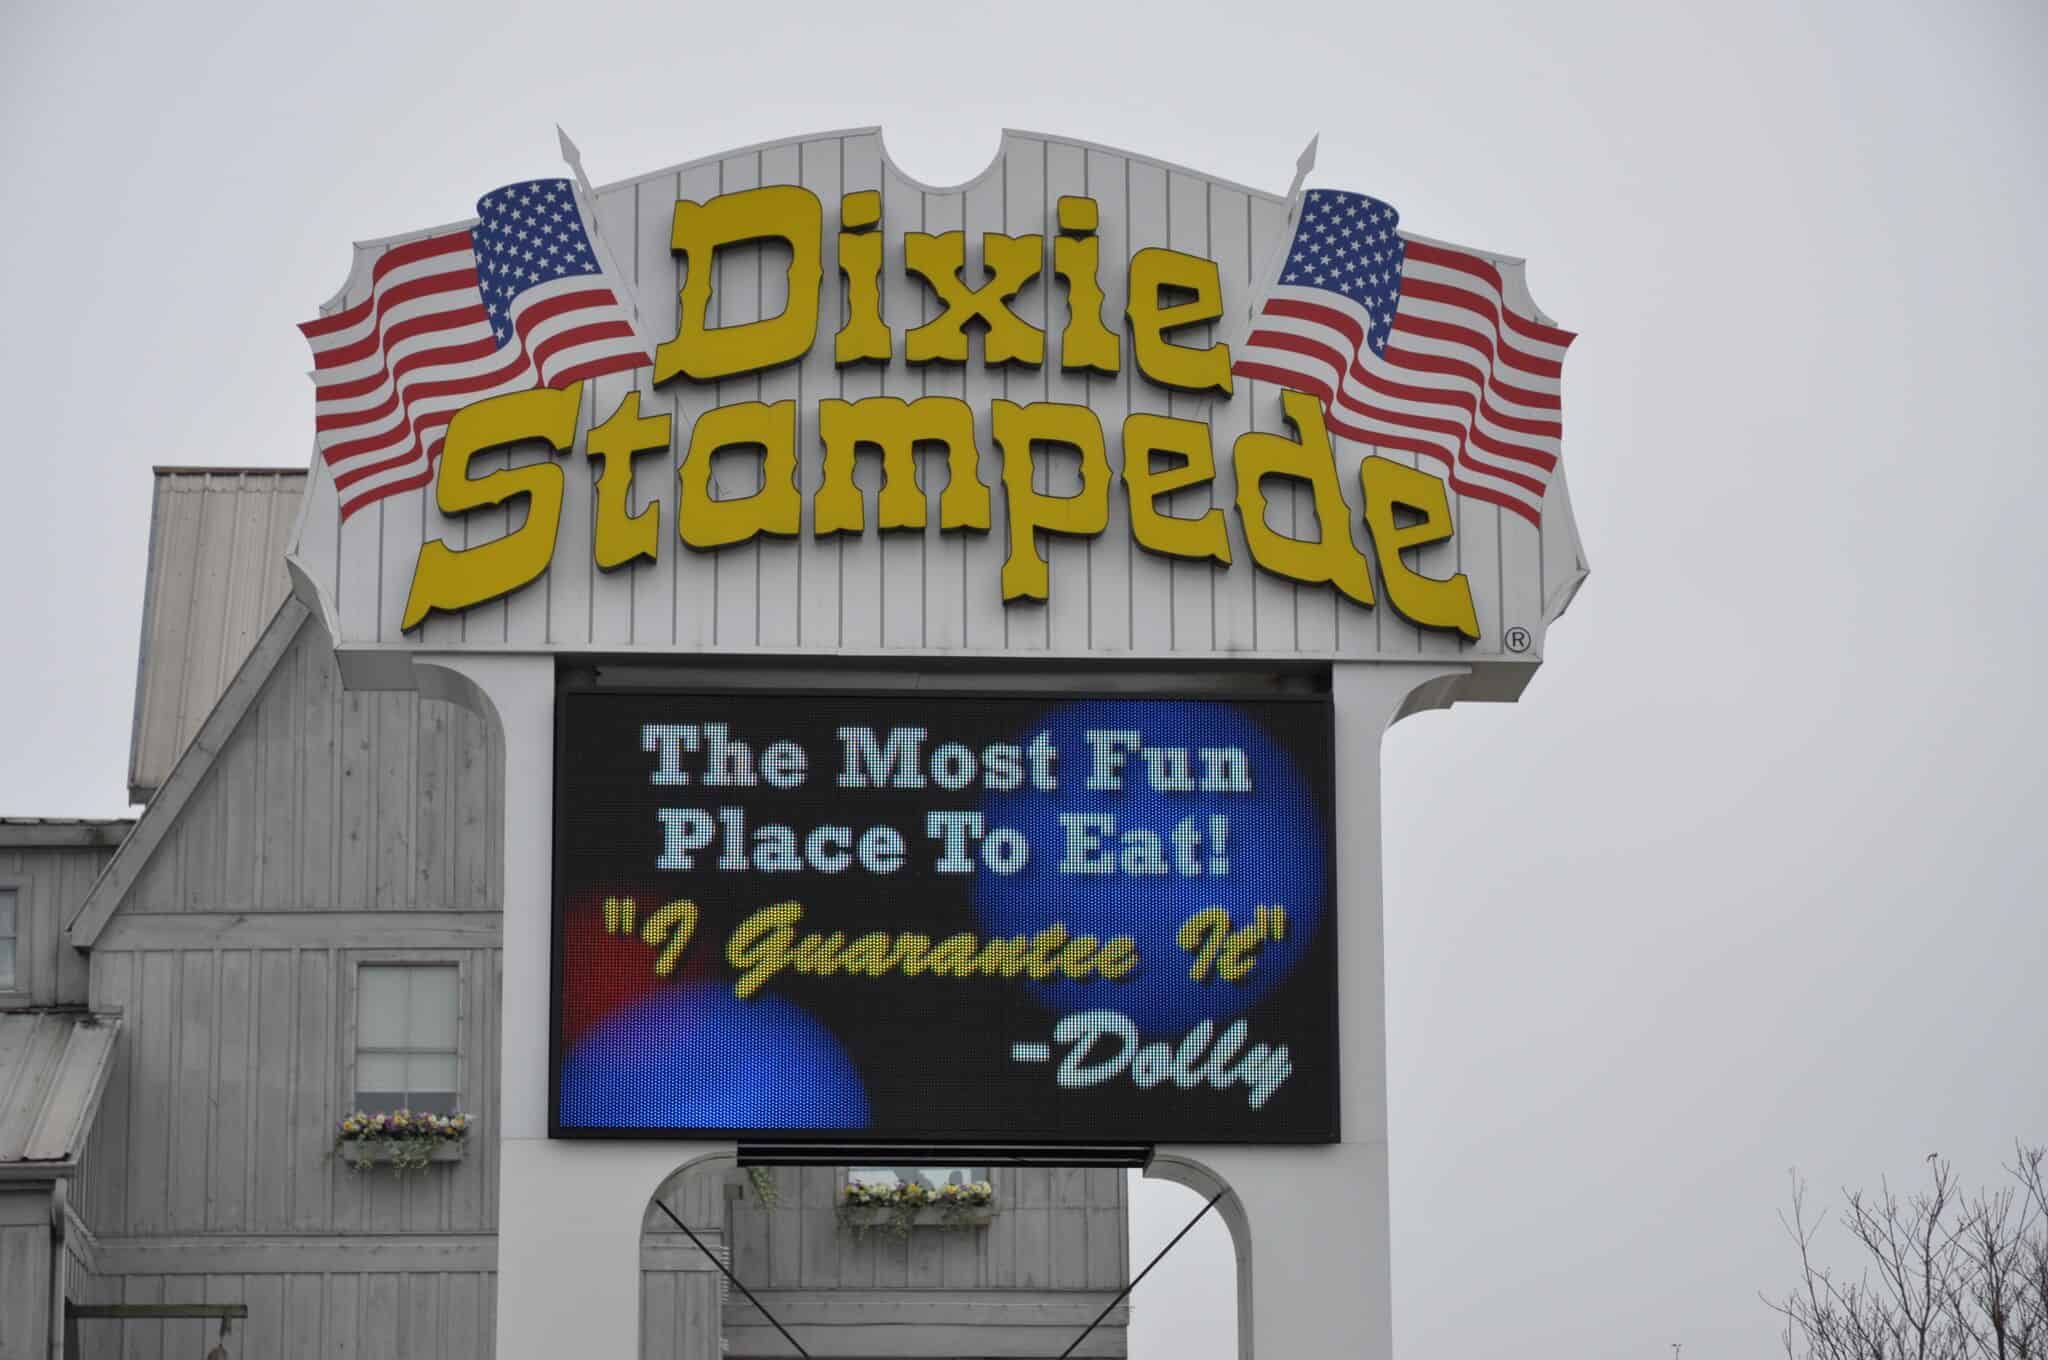 Dixie Stampede Coupons & Tips for Visiting the Pigeon Forge ...